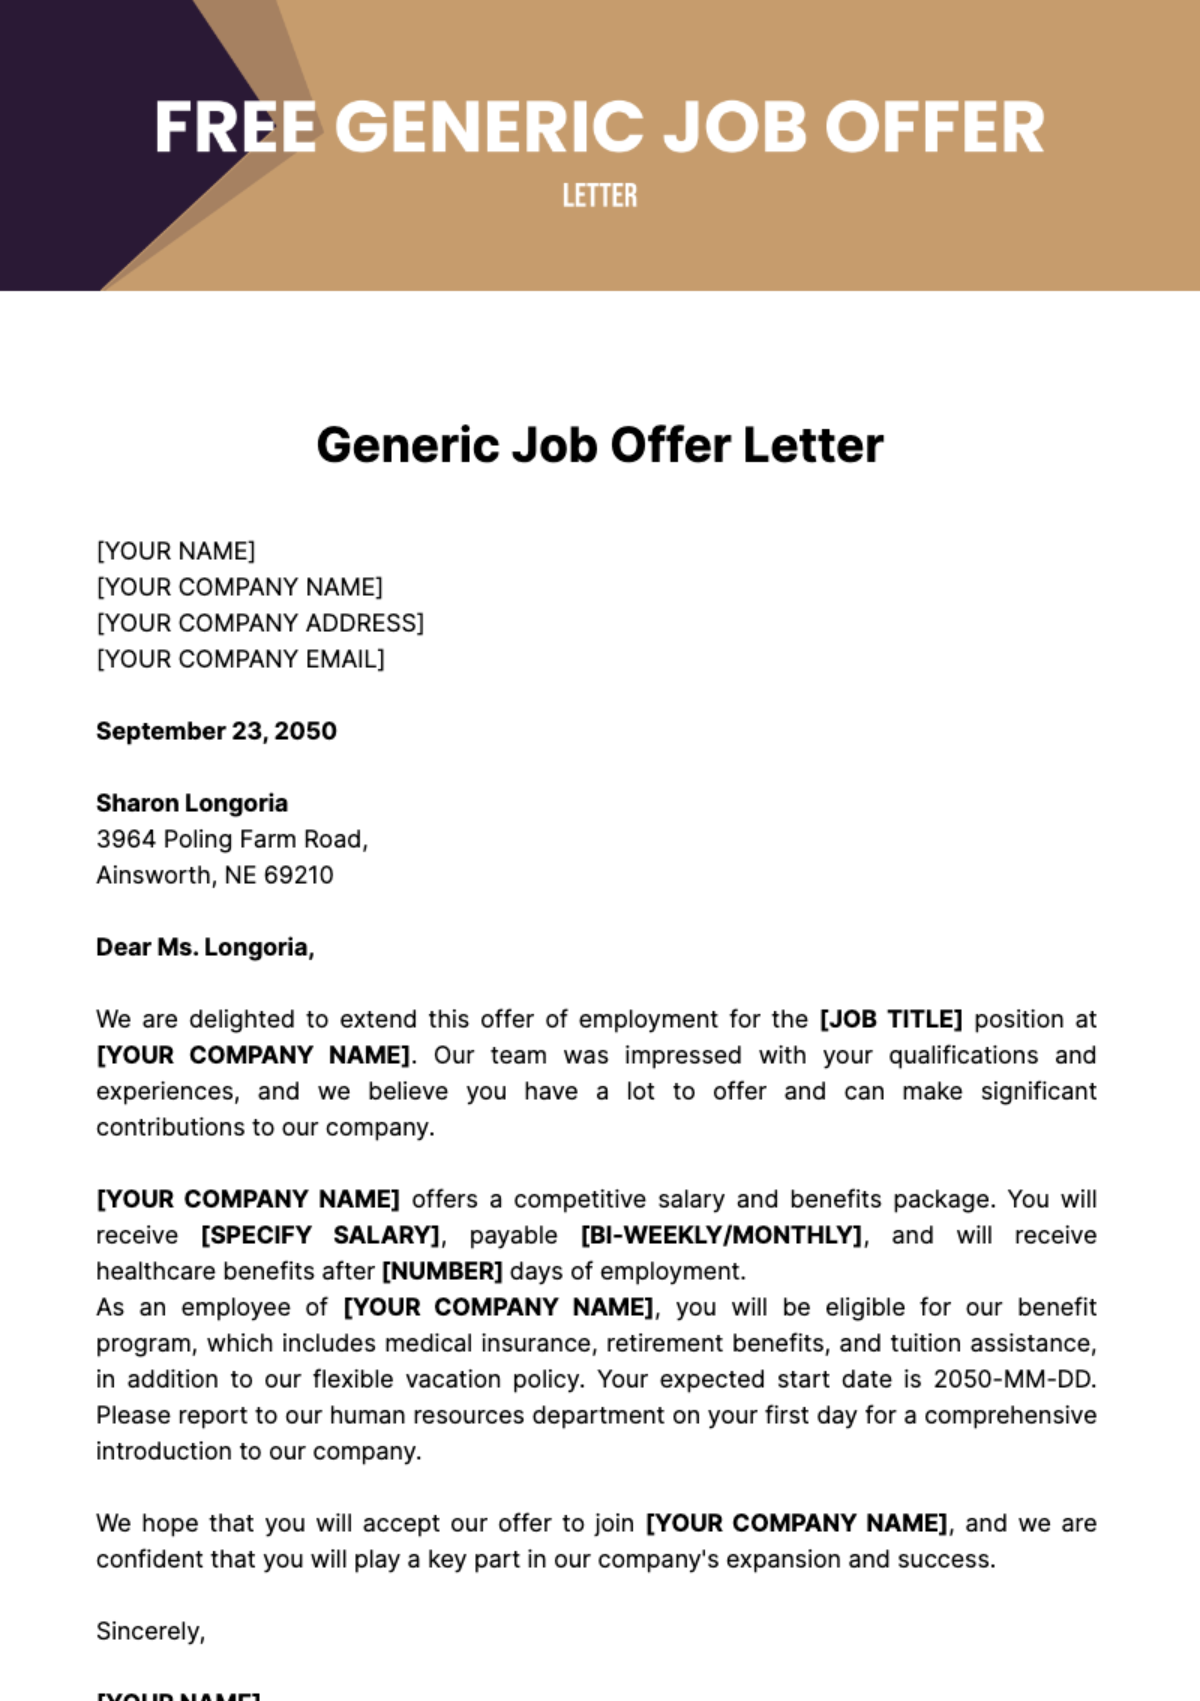 Free Generic Job Offer Letter Template